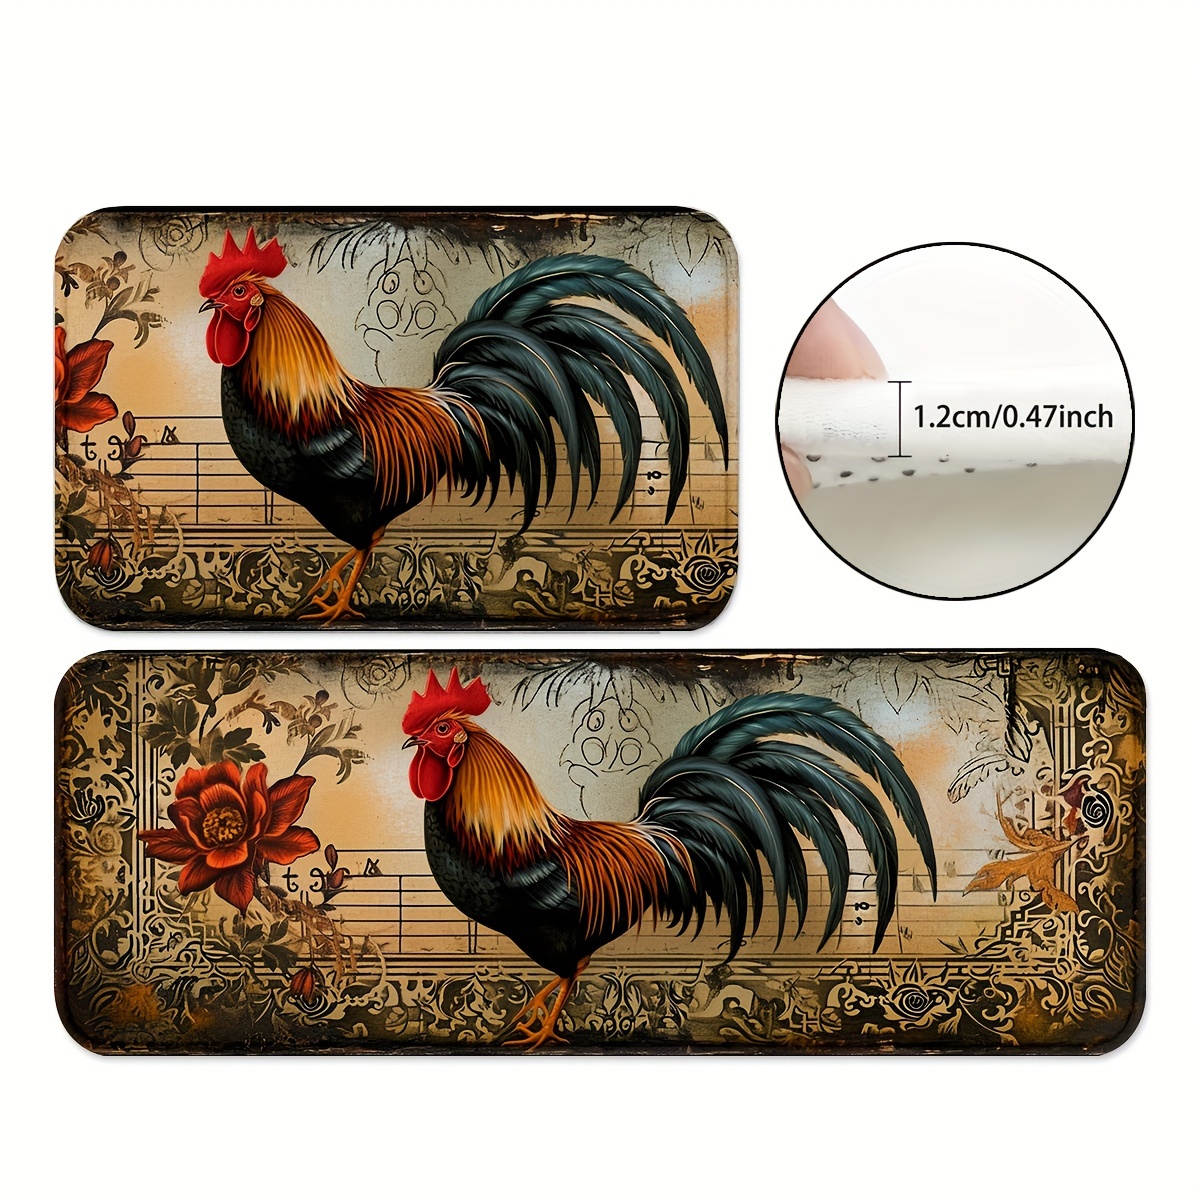 

1/2pcs Vivid Rooster Print Kitchen Mats, Country Style Throw Carpets, Washable Lounge Runner Rugs, For Home Office Spring Decor Farmhouse High Traffic Area Sink Hotel Rural Zone Indoors Outdoors